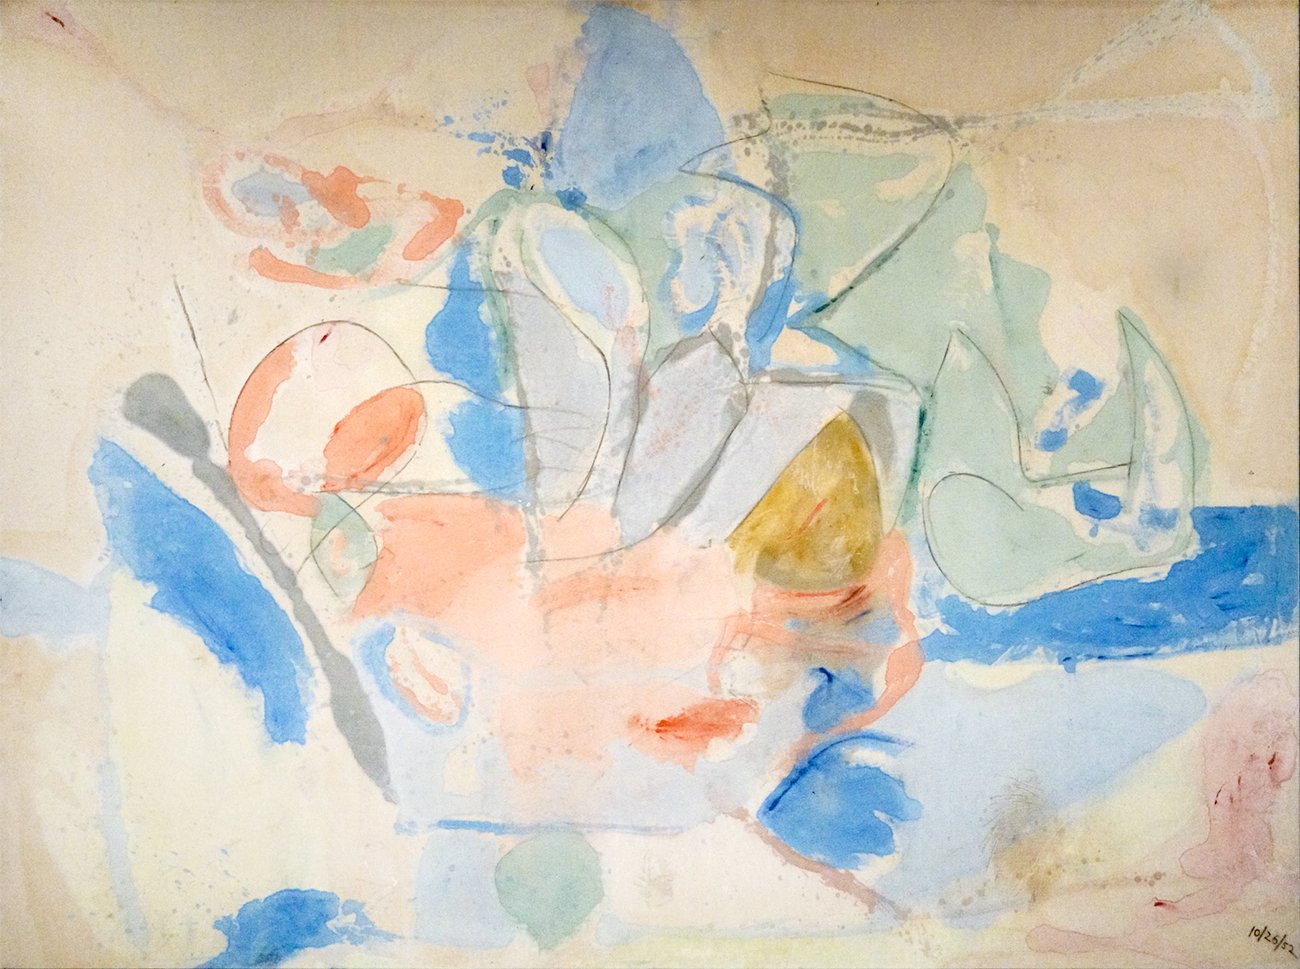 Abstract artwork titled “Mountains and Sea” by Helen Frankenthaler showcasing varying washes of color that suggest natural elements, with blended blues and greens potentially representing the sea and mountainous landscapes. The random yet harmonious splashes of color against an unprimed canvas demonstrate the innovative staining technique employed by the artist.